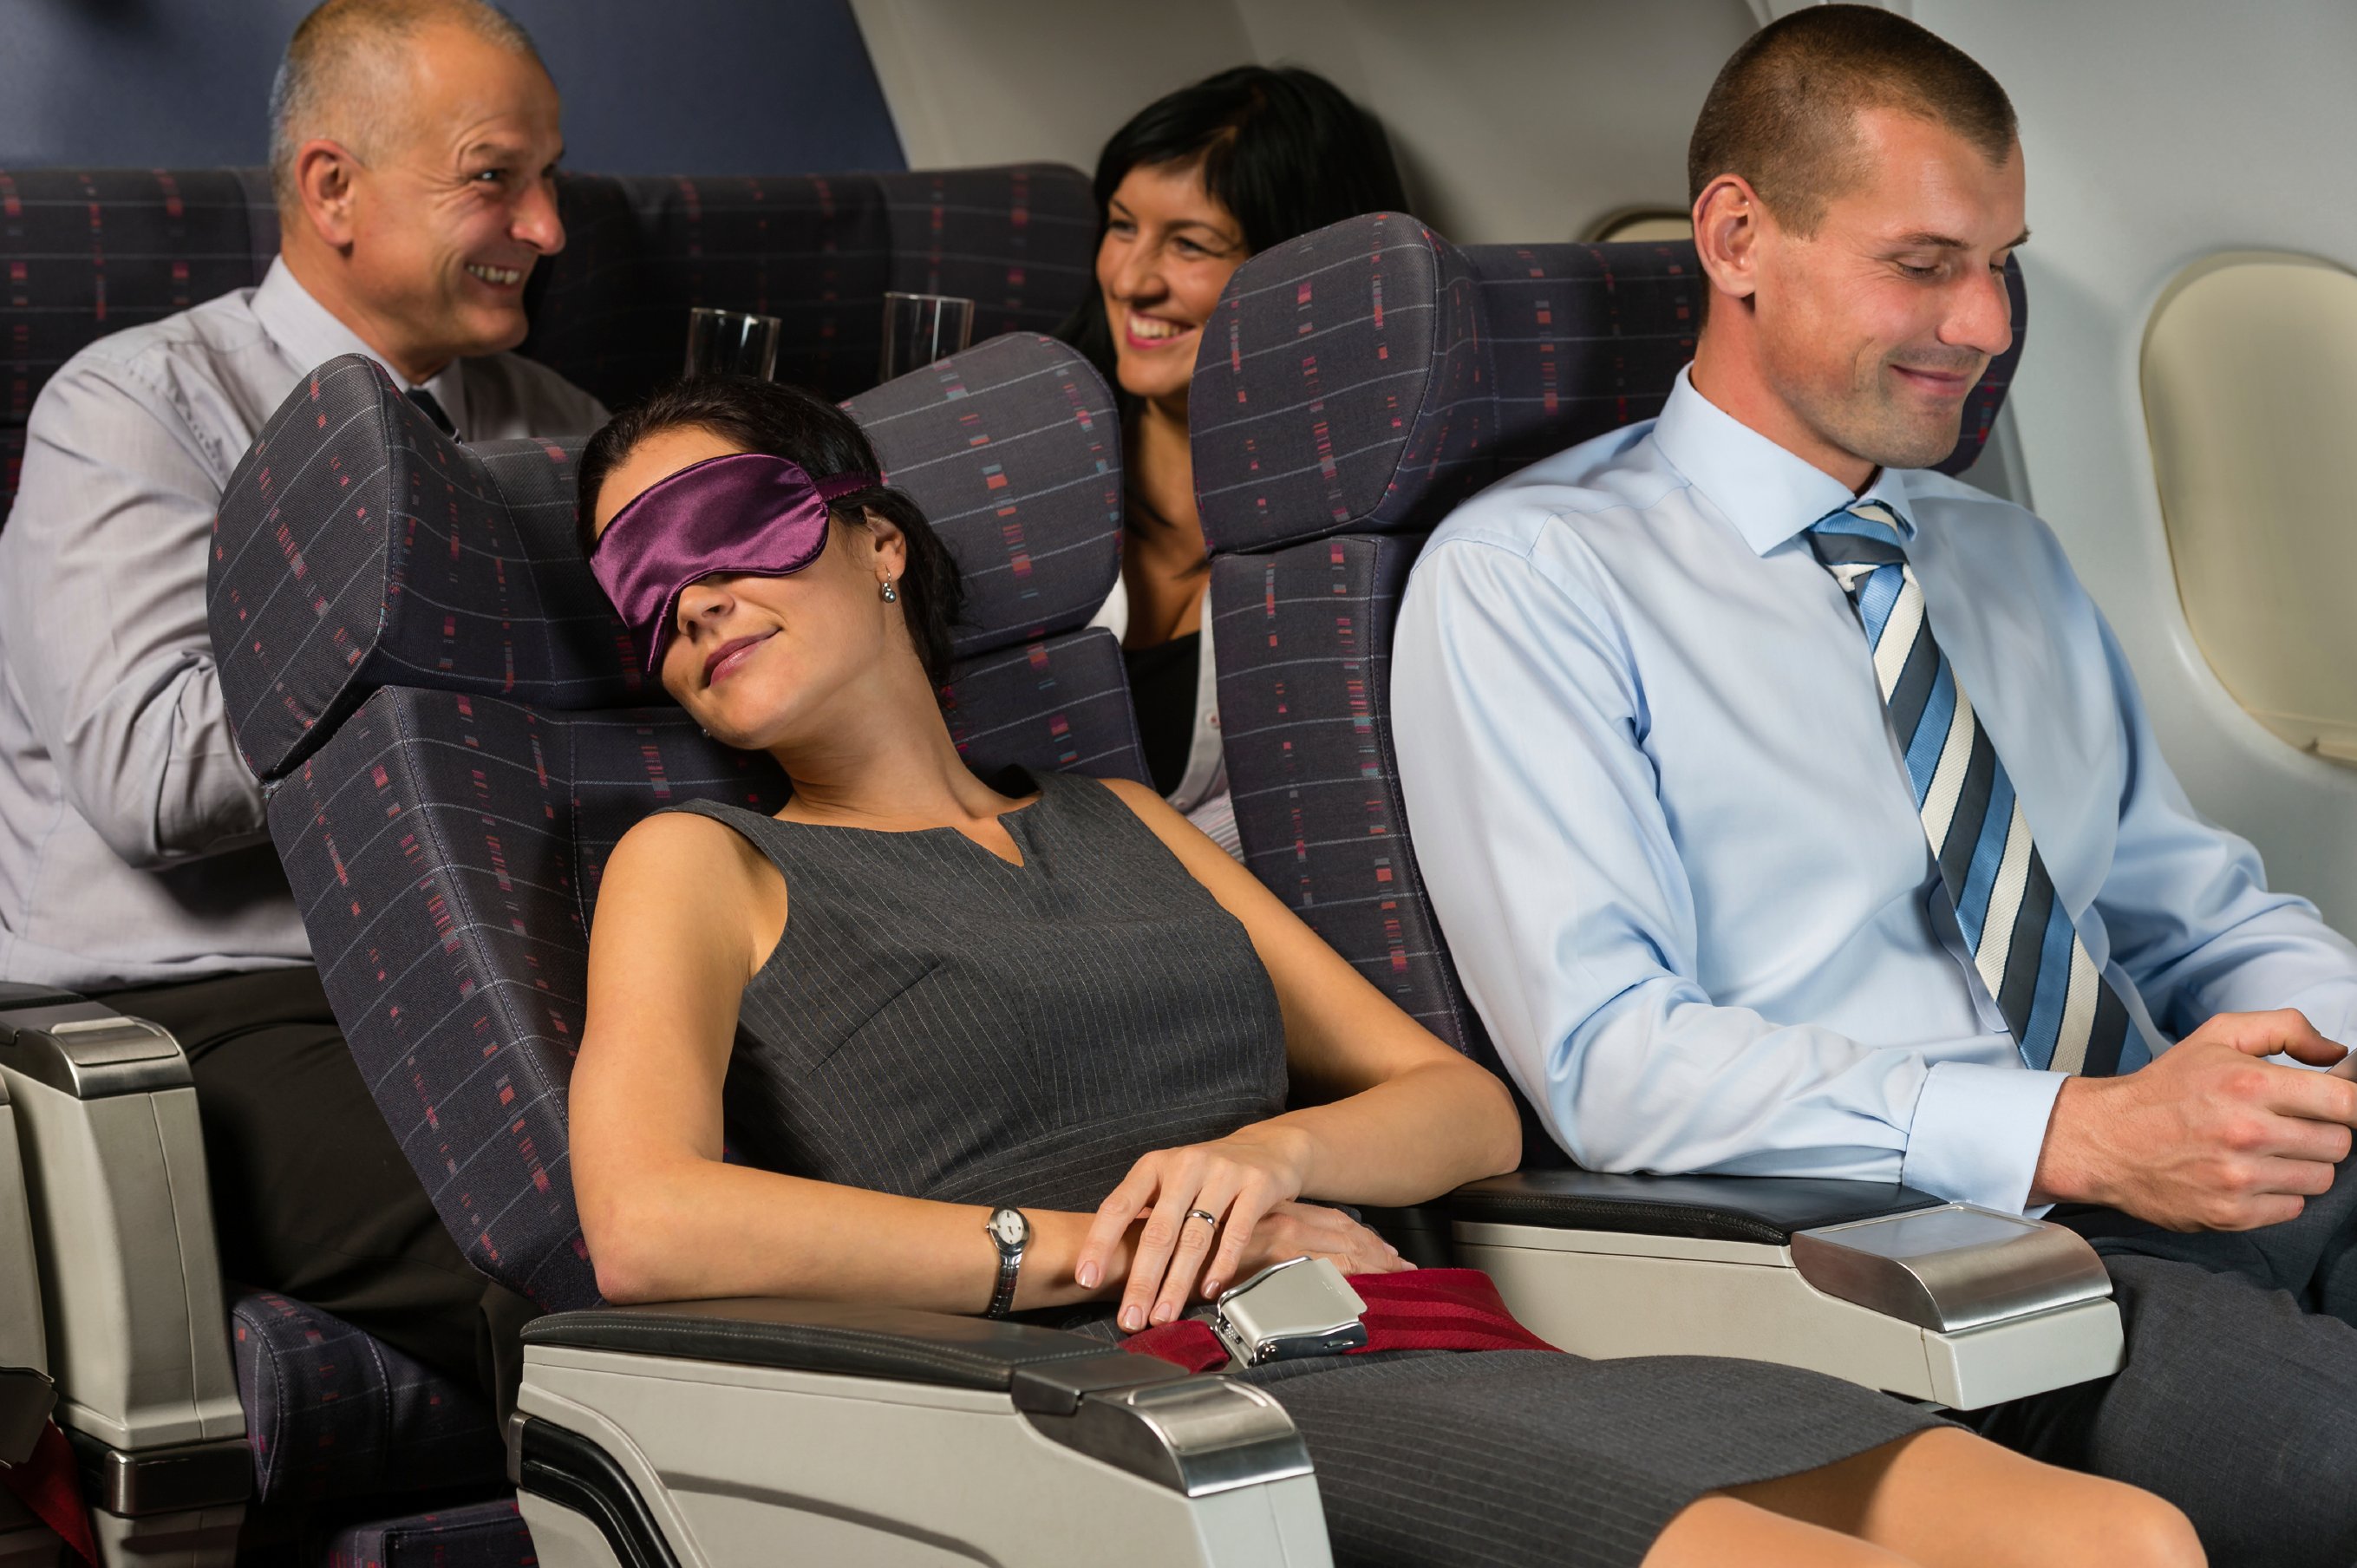 Get Comfortable Flying With These Nifty Travel Gadgets (Even in